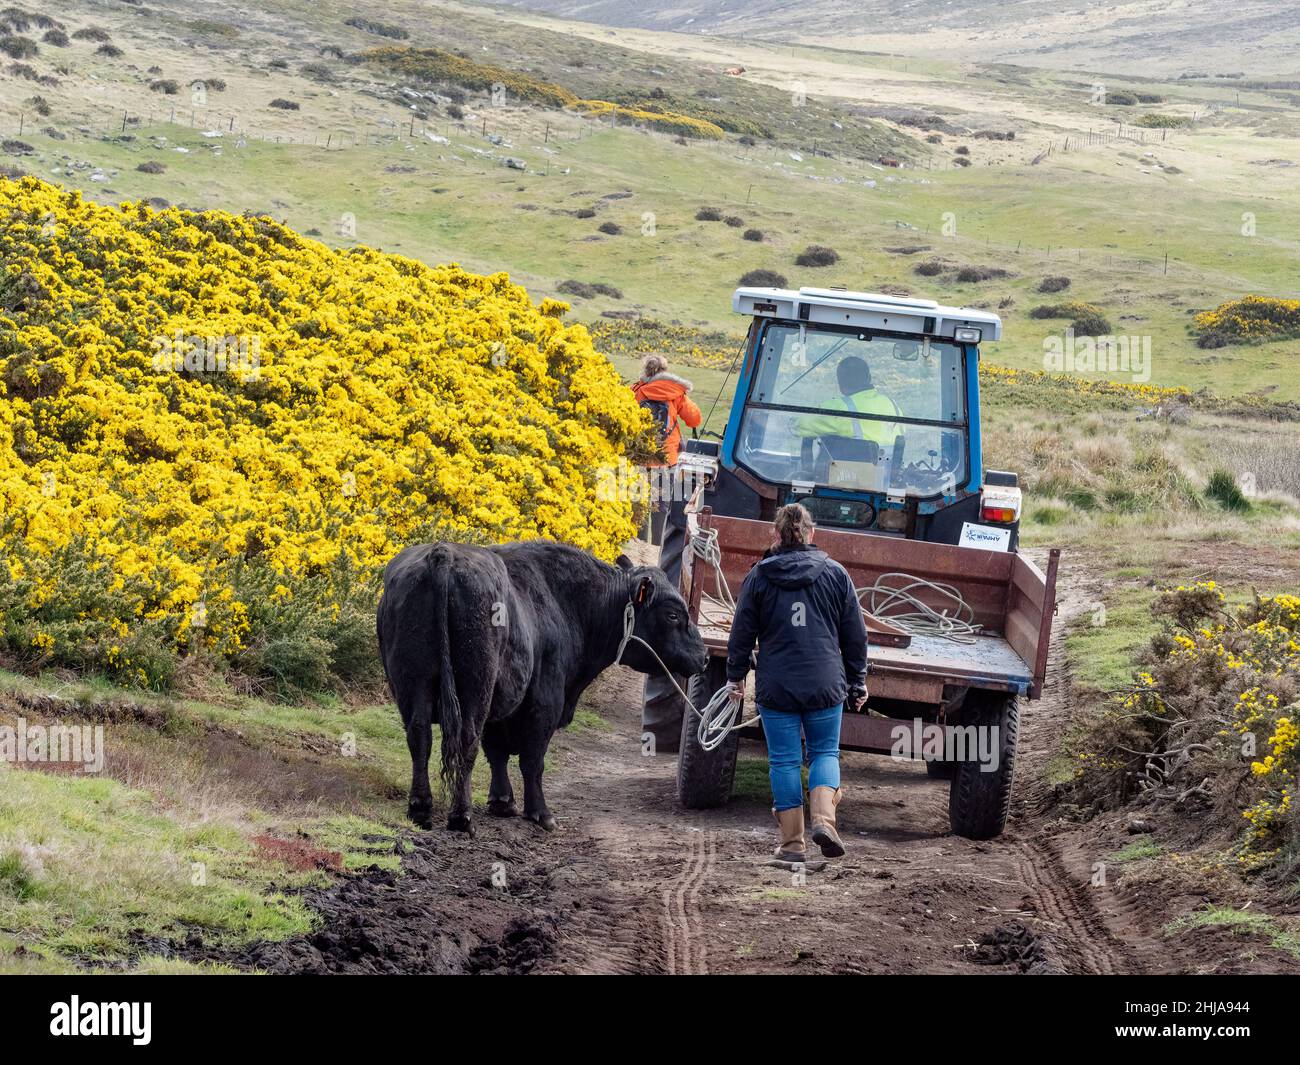 Cattle being led to the farm at Carcass Island, Falkland Islands. Stock Photo